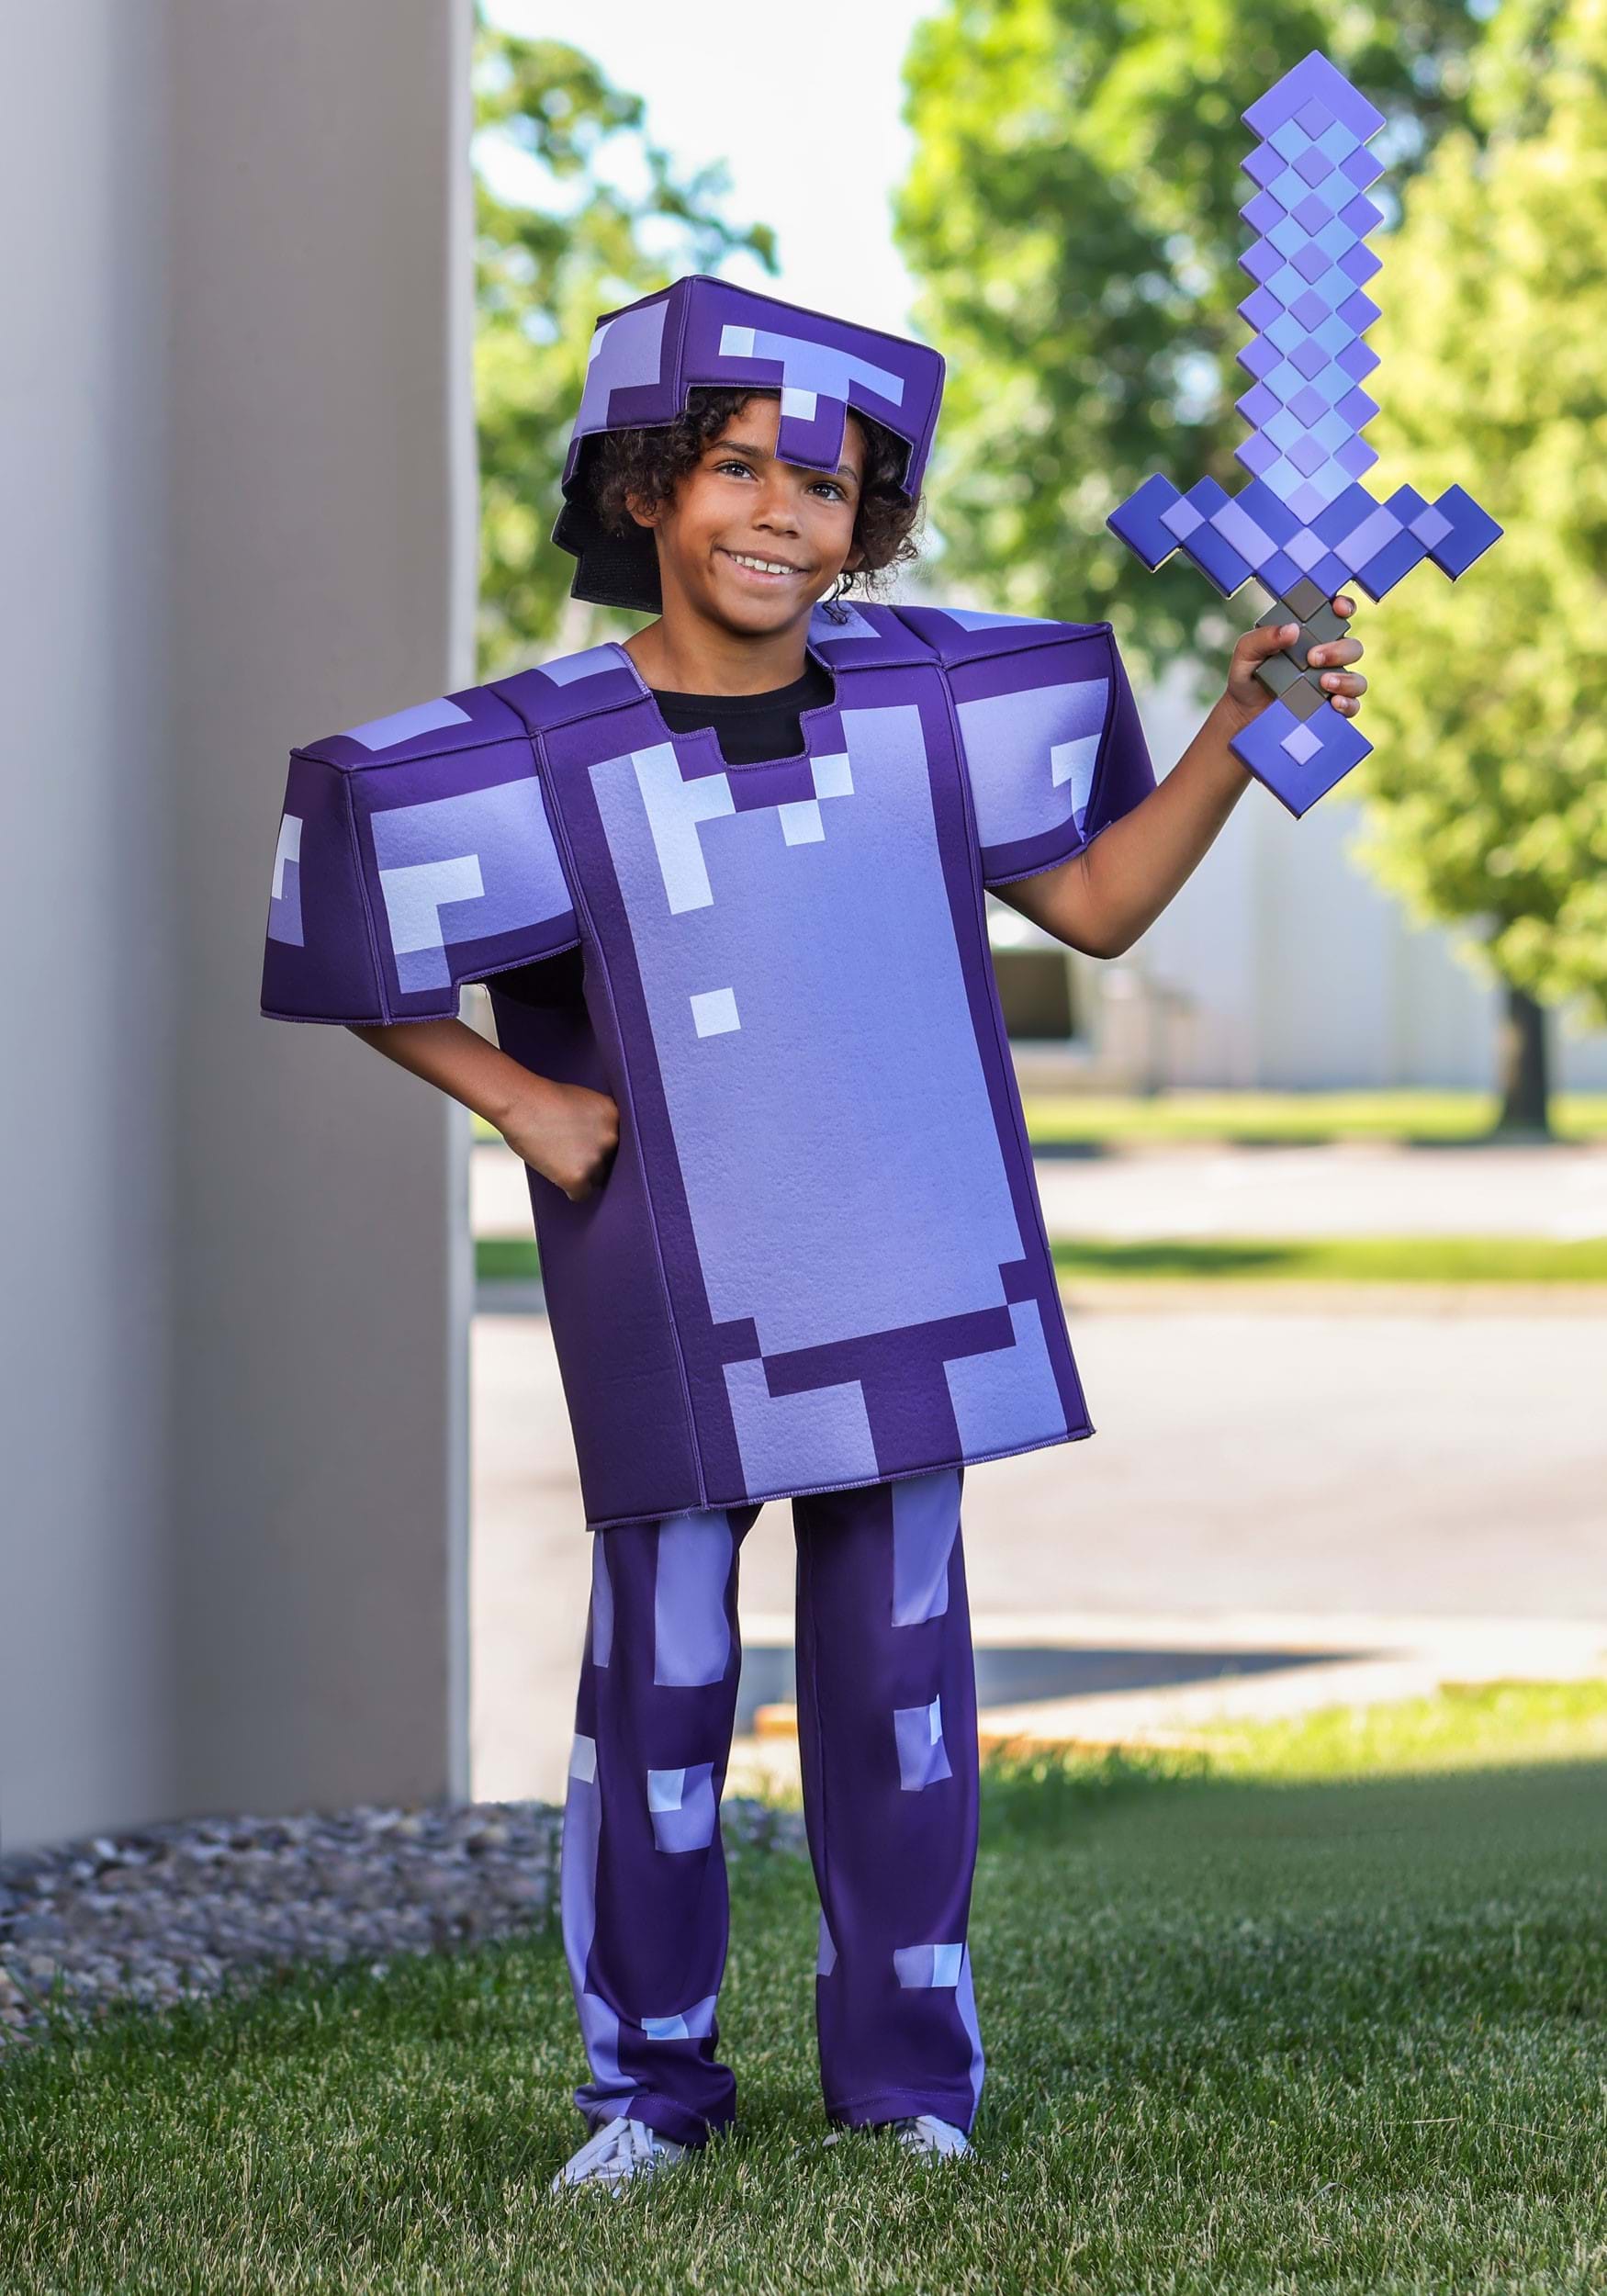 https://images.halloweencostumes.ca/products/79782/1-1/minecraft-enchanted-diamond-armor-deluxe-kids-costume.jpg